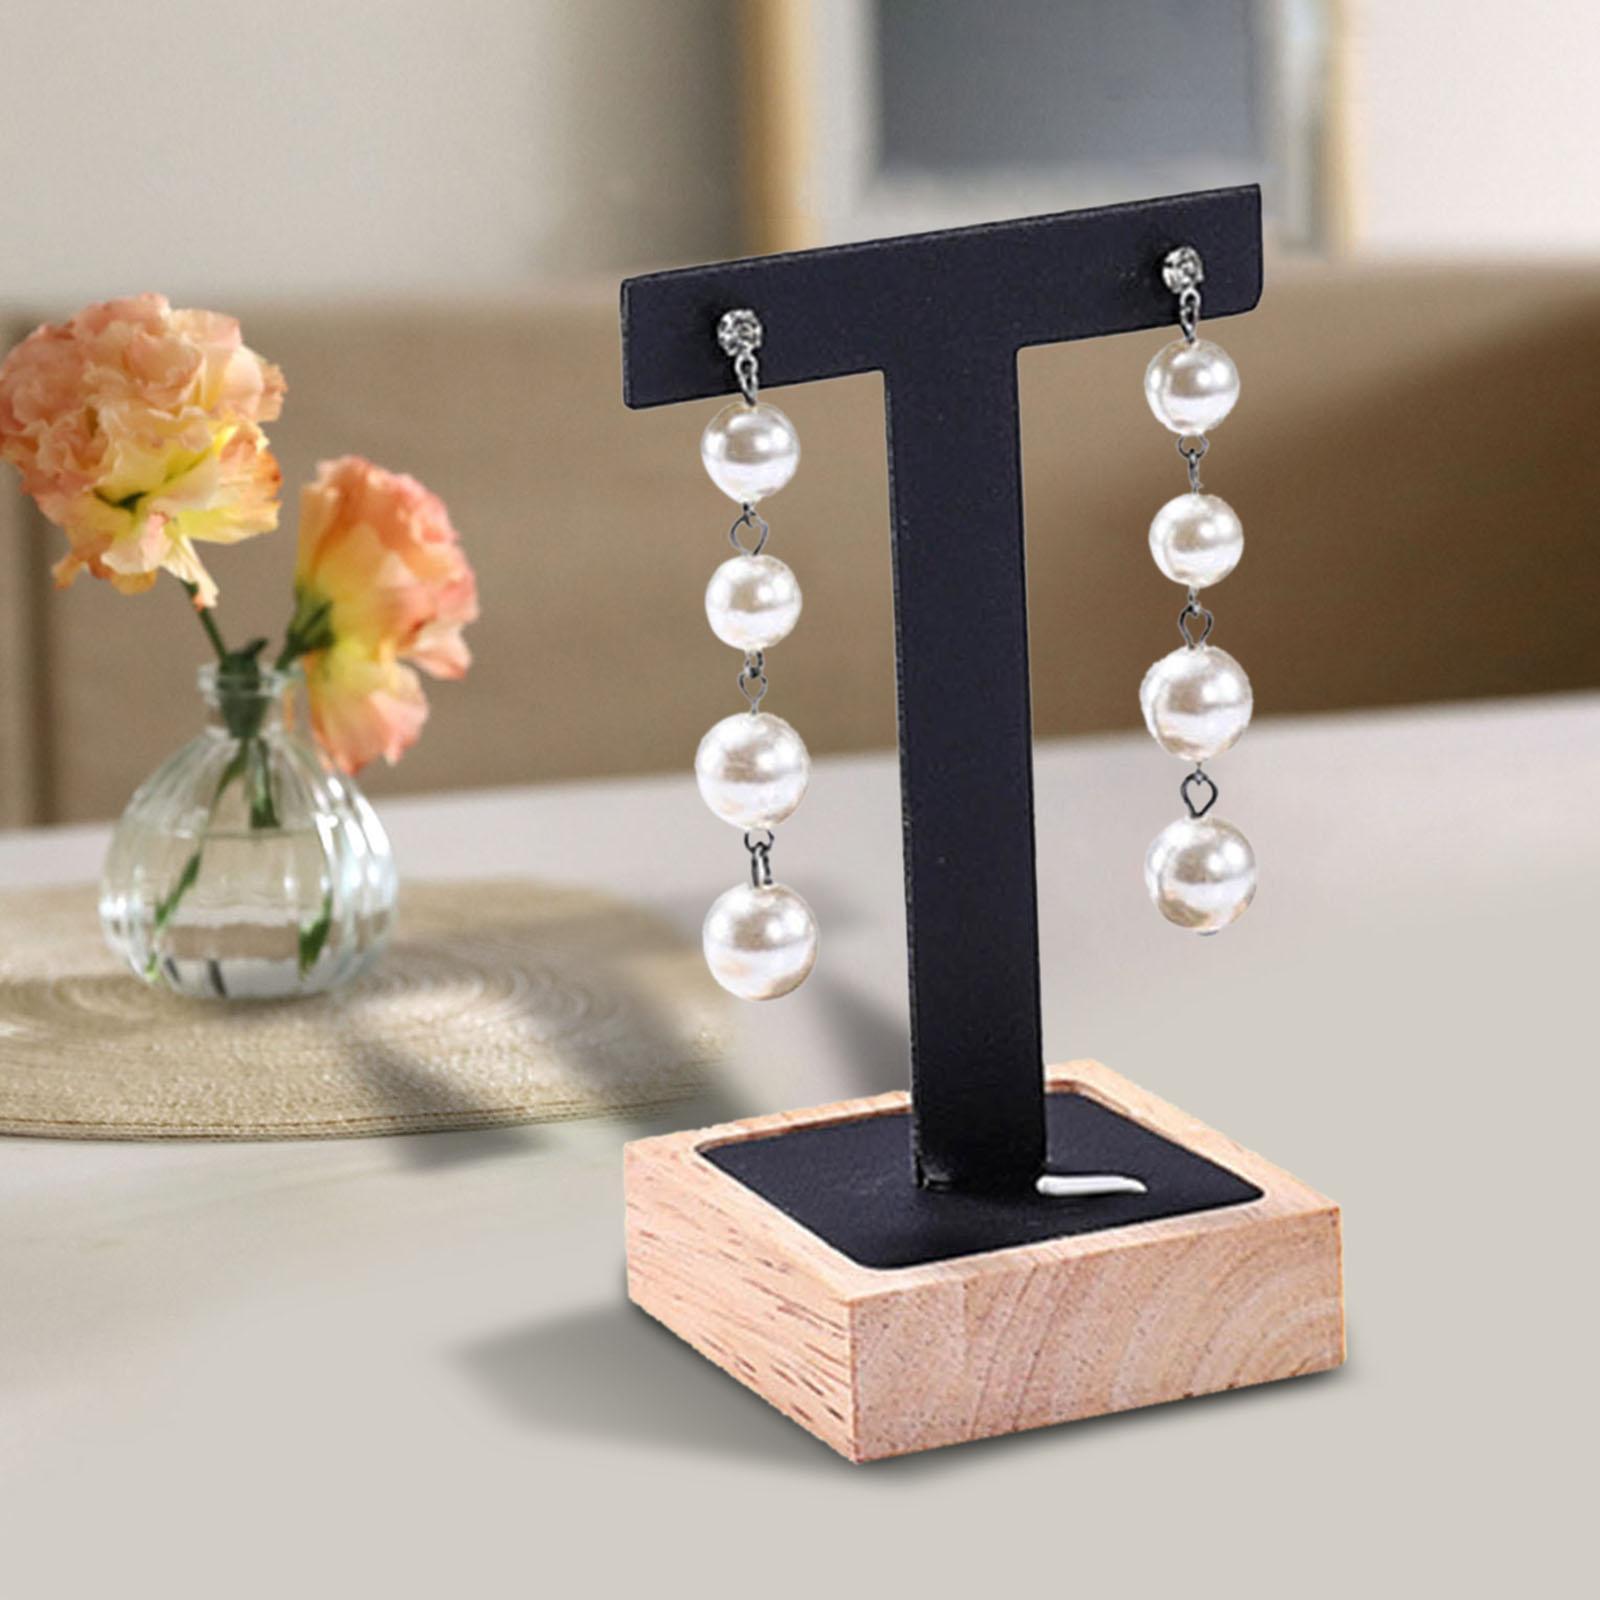 Wooden Earring Display Holder Hanging Jewelry T Shaped for Showroom Retail